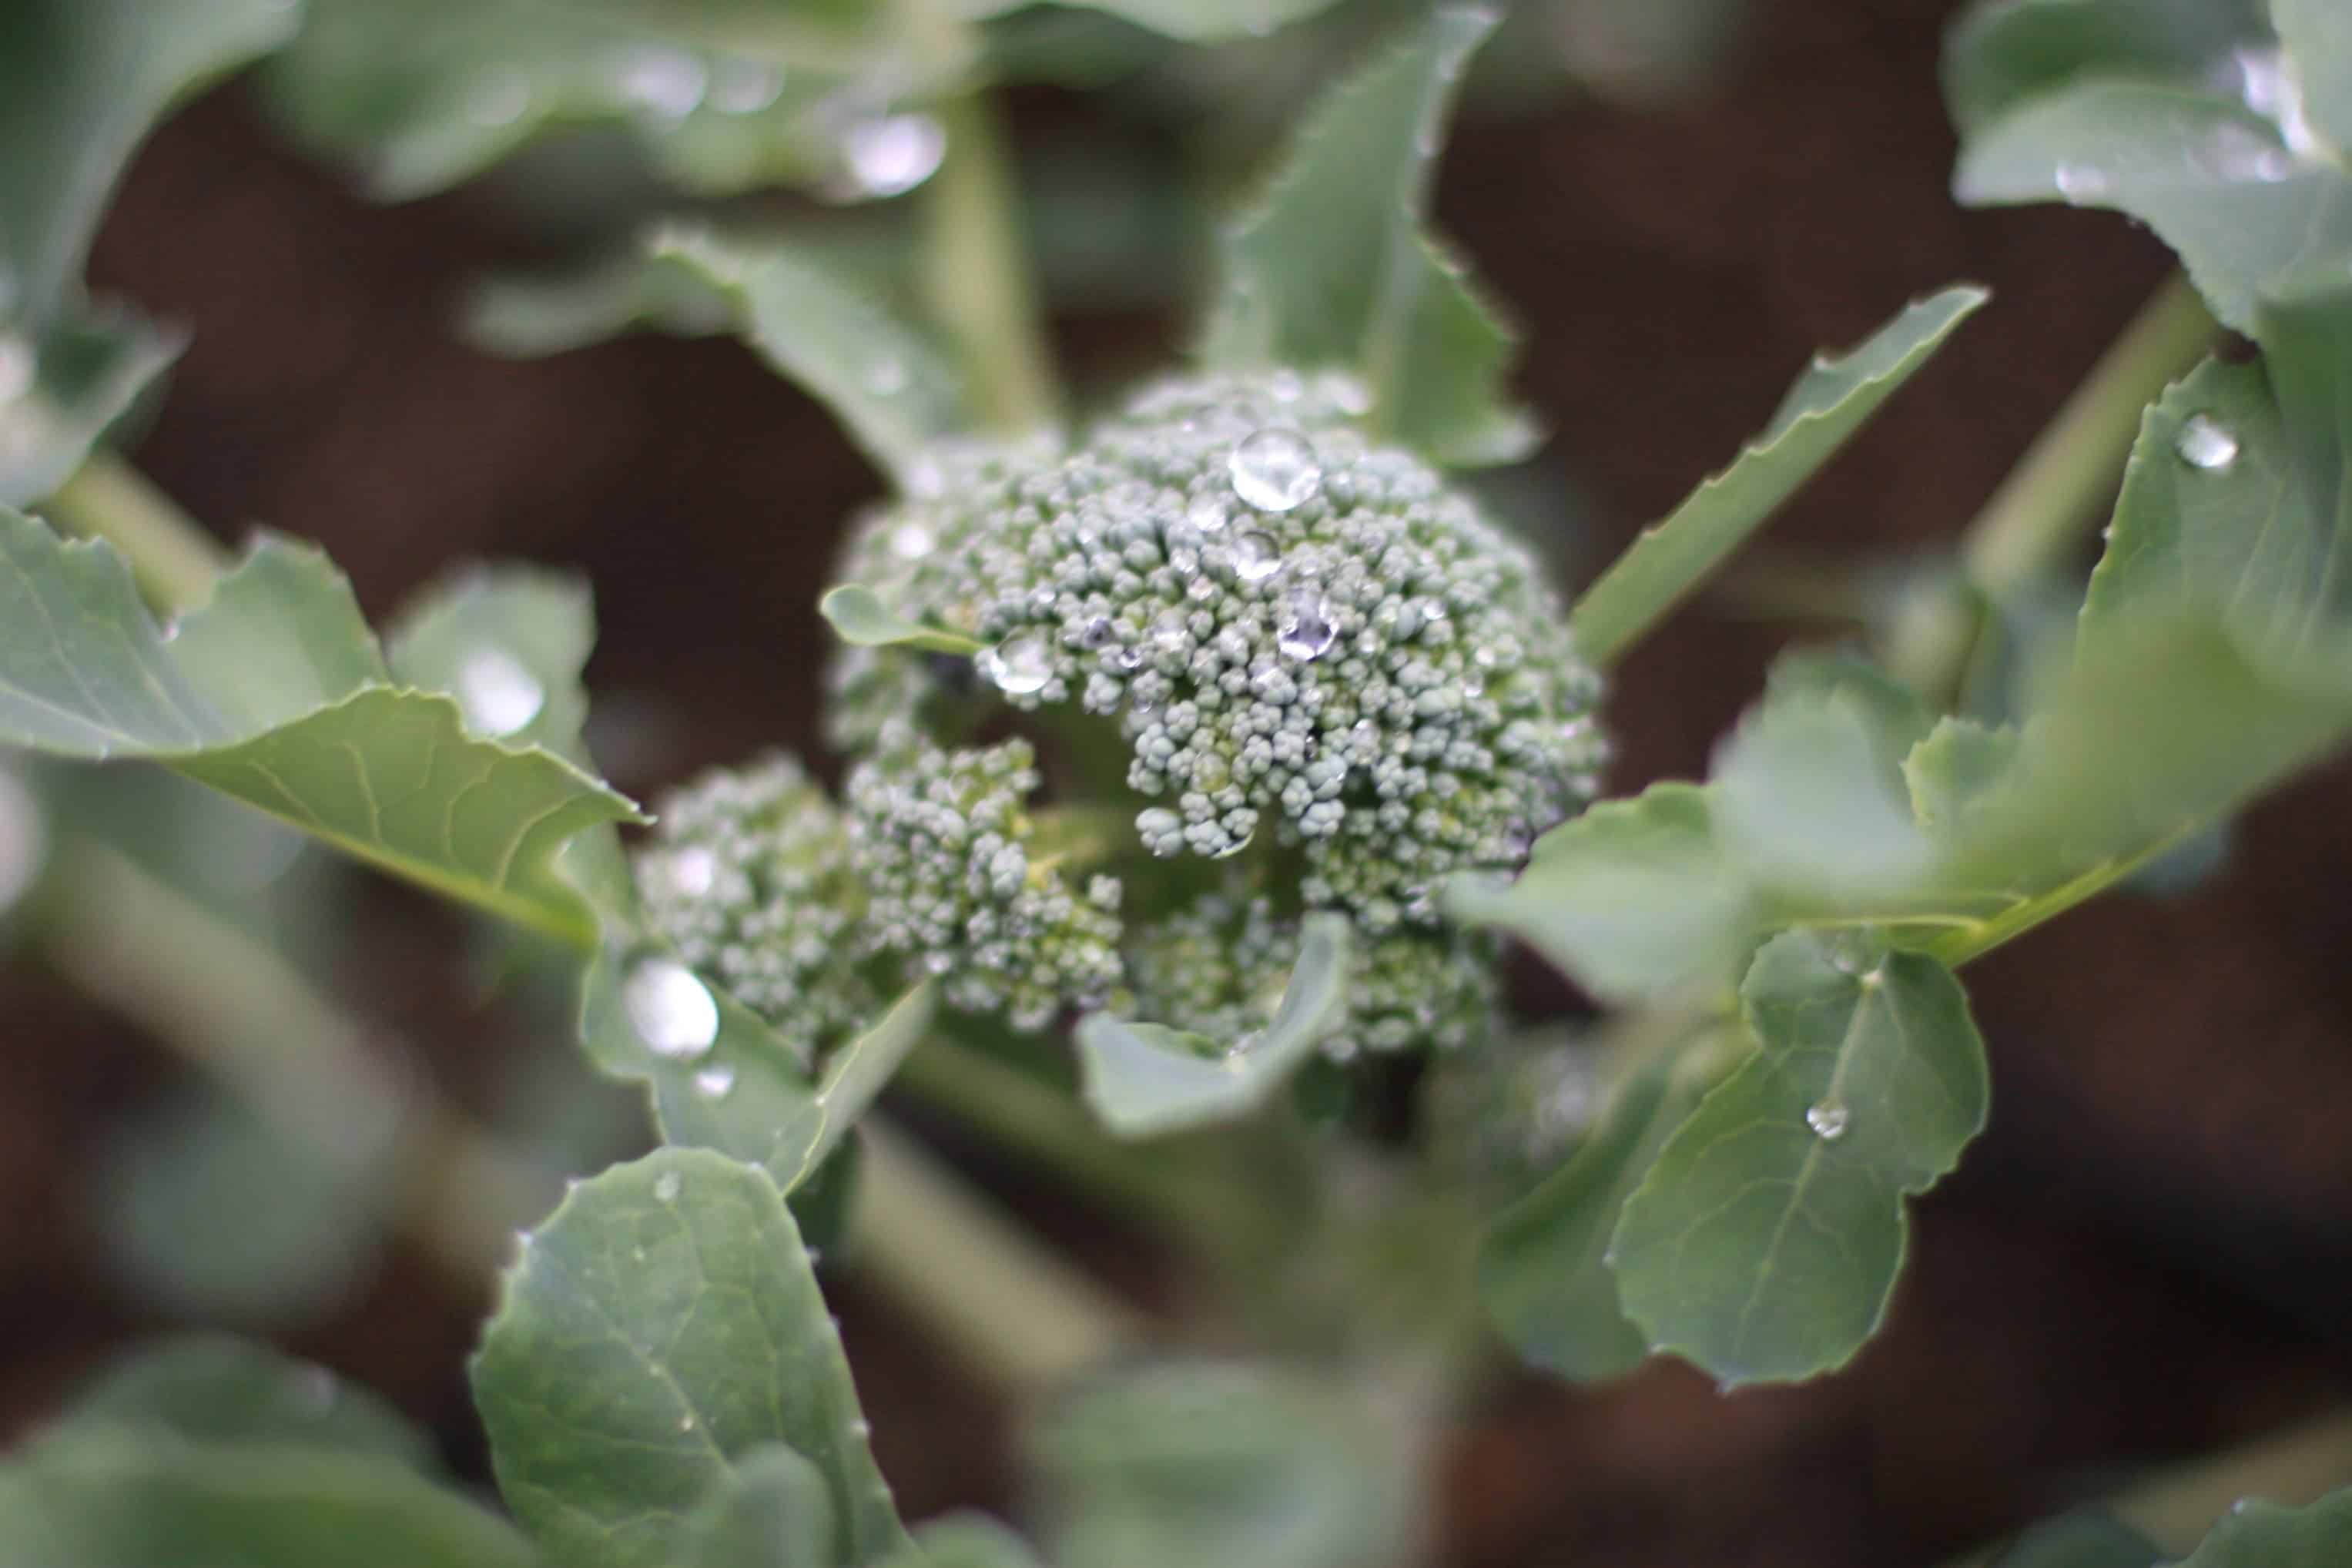 Broccoli, one of the affected crops. Credit: Living in Monrovia (Flickr)